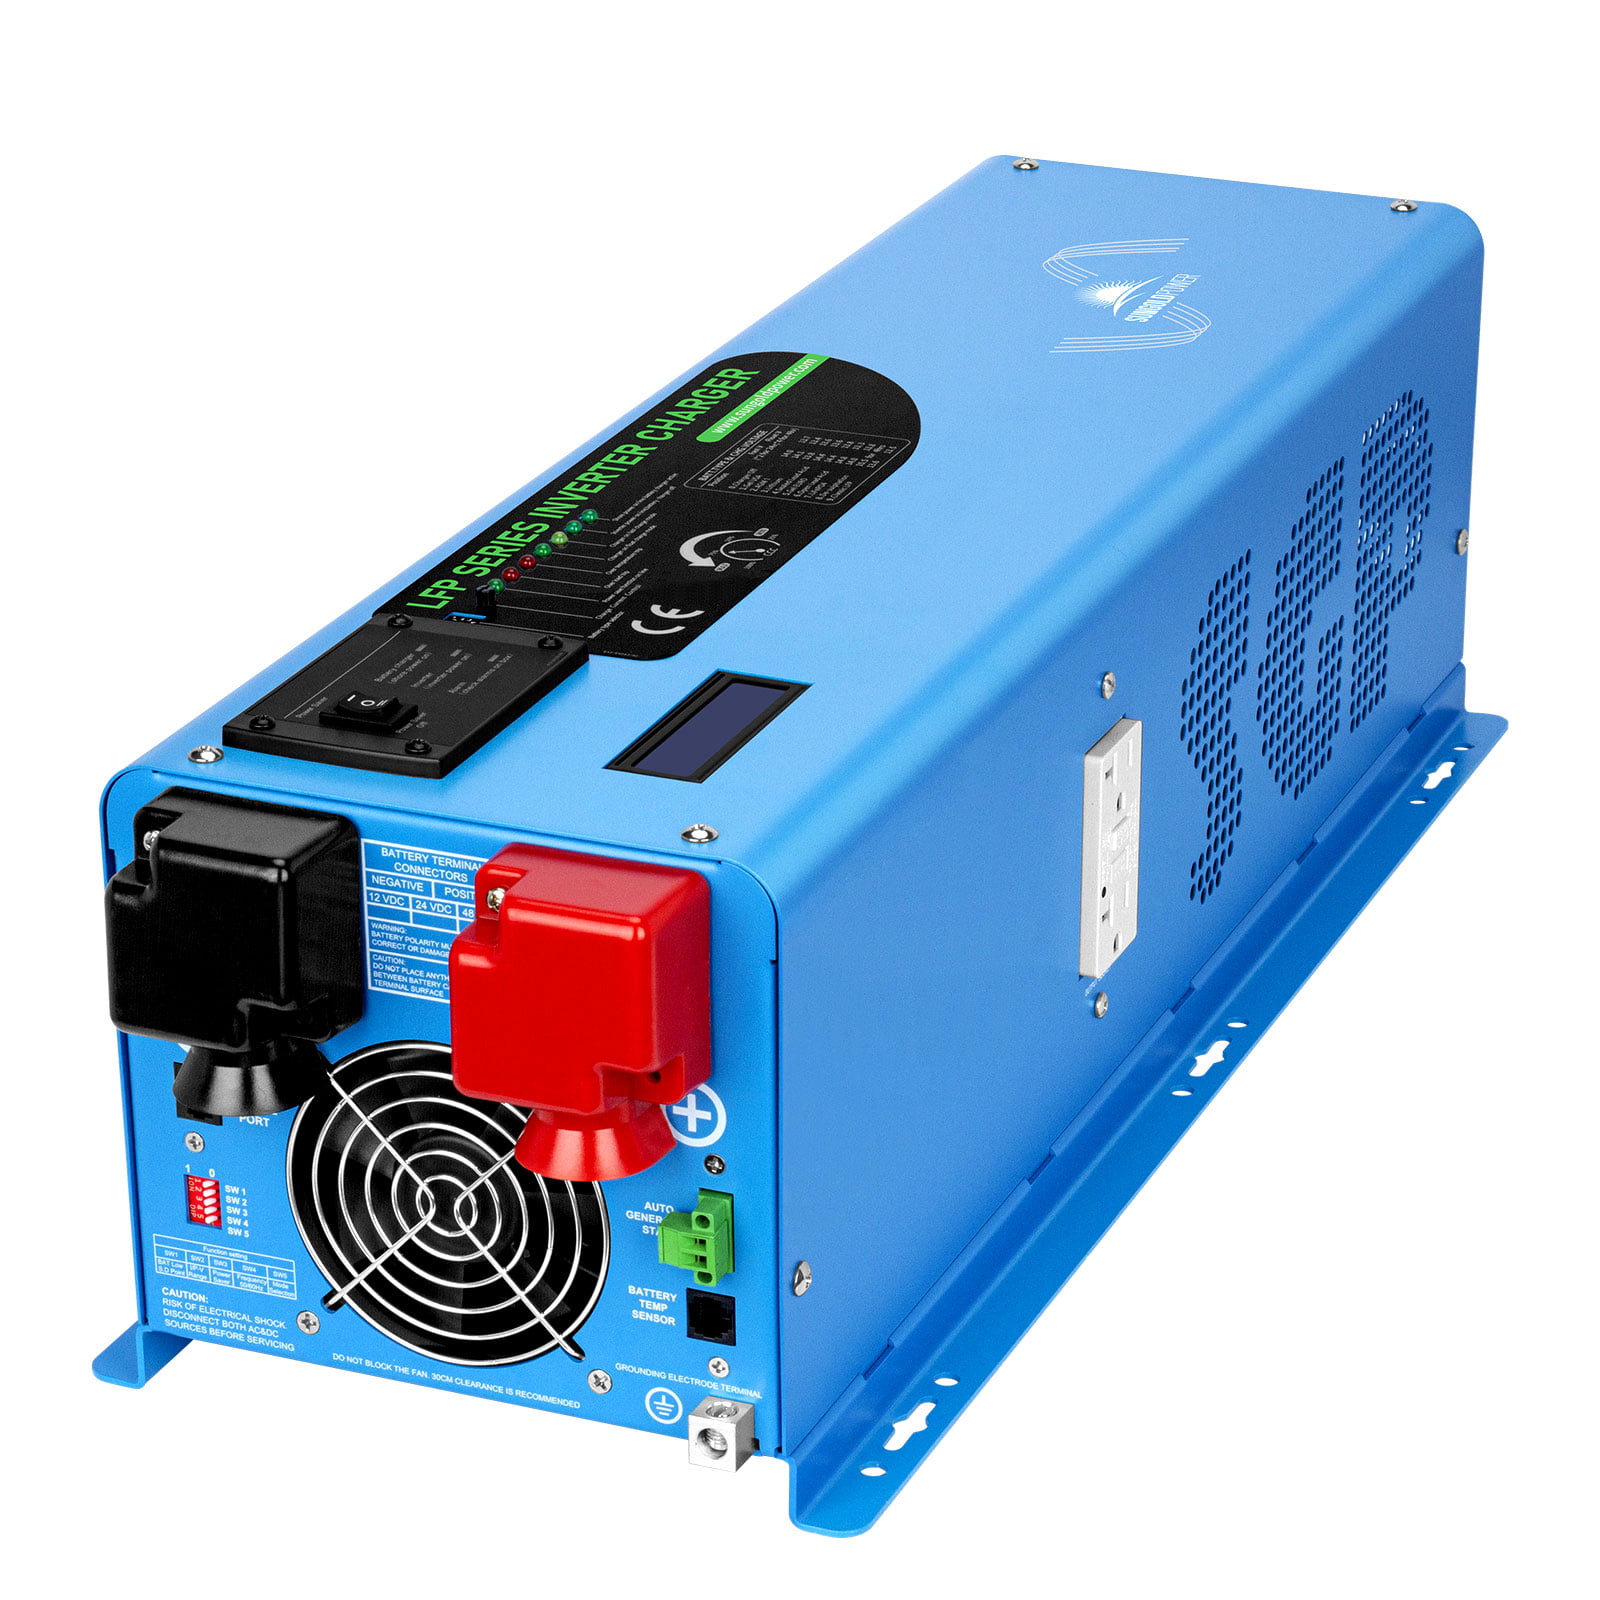 GTPOWER 12000W Peak 36000W Split Phase Pure Sine Wave Power Inverter,Low Frequency Inverter DC 48V AC Input 240V AC Output 120V 240V Converter With 40A MPPT Solar Charger Controller,12kW 